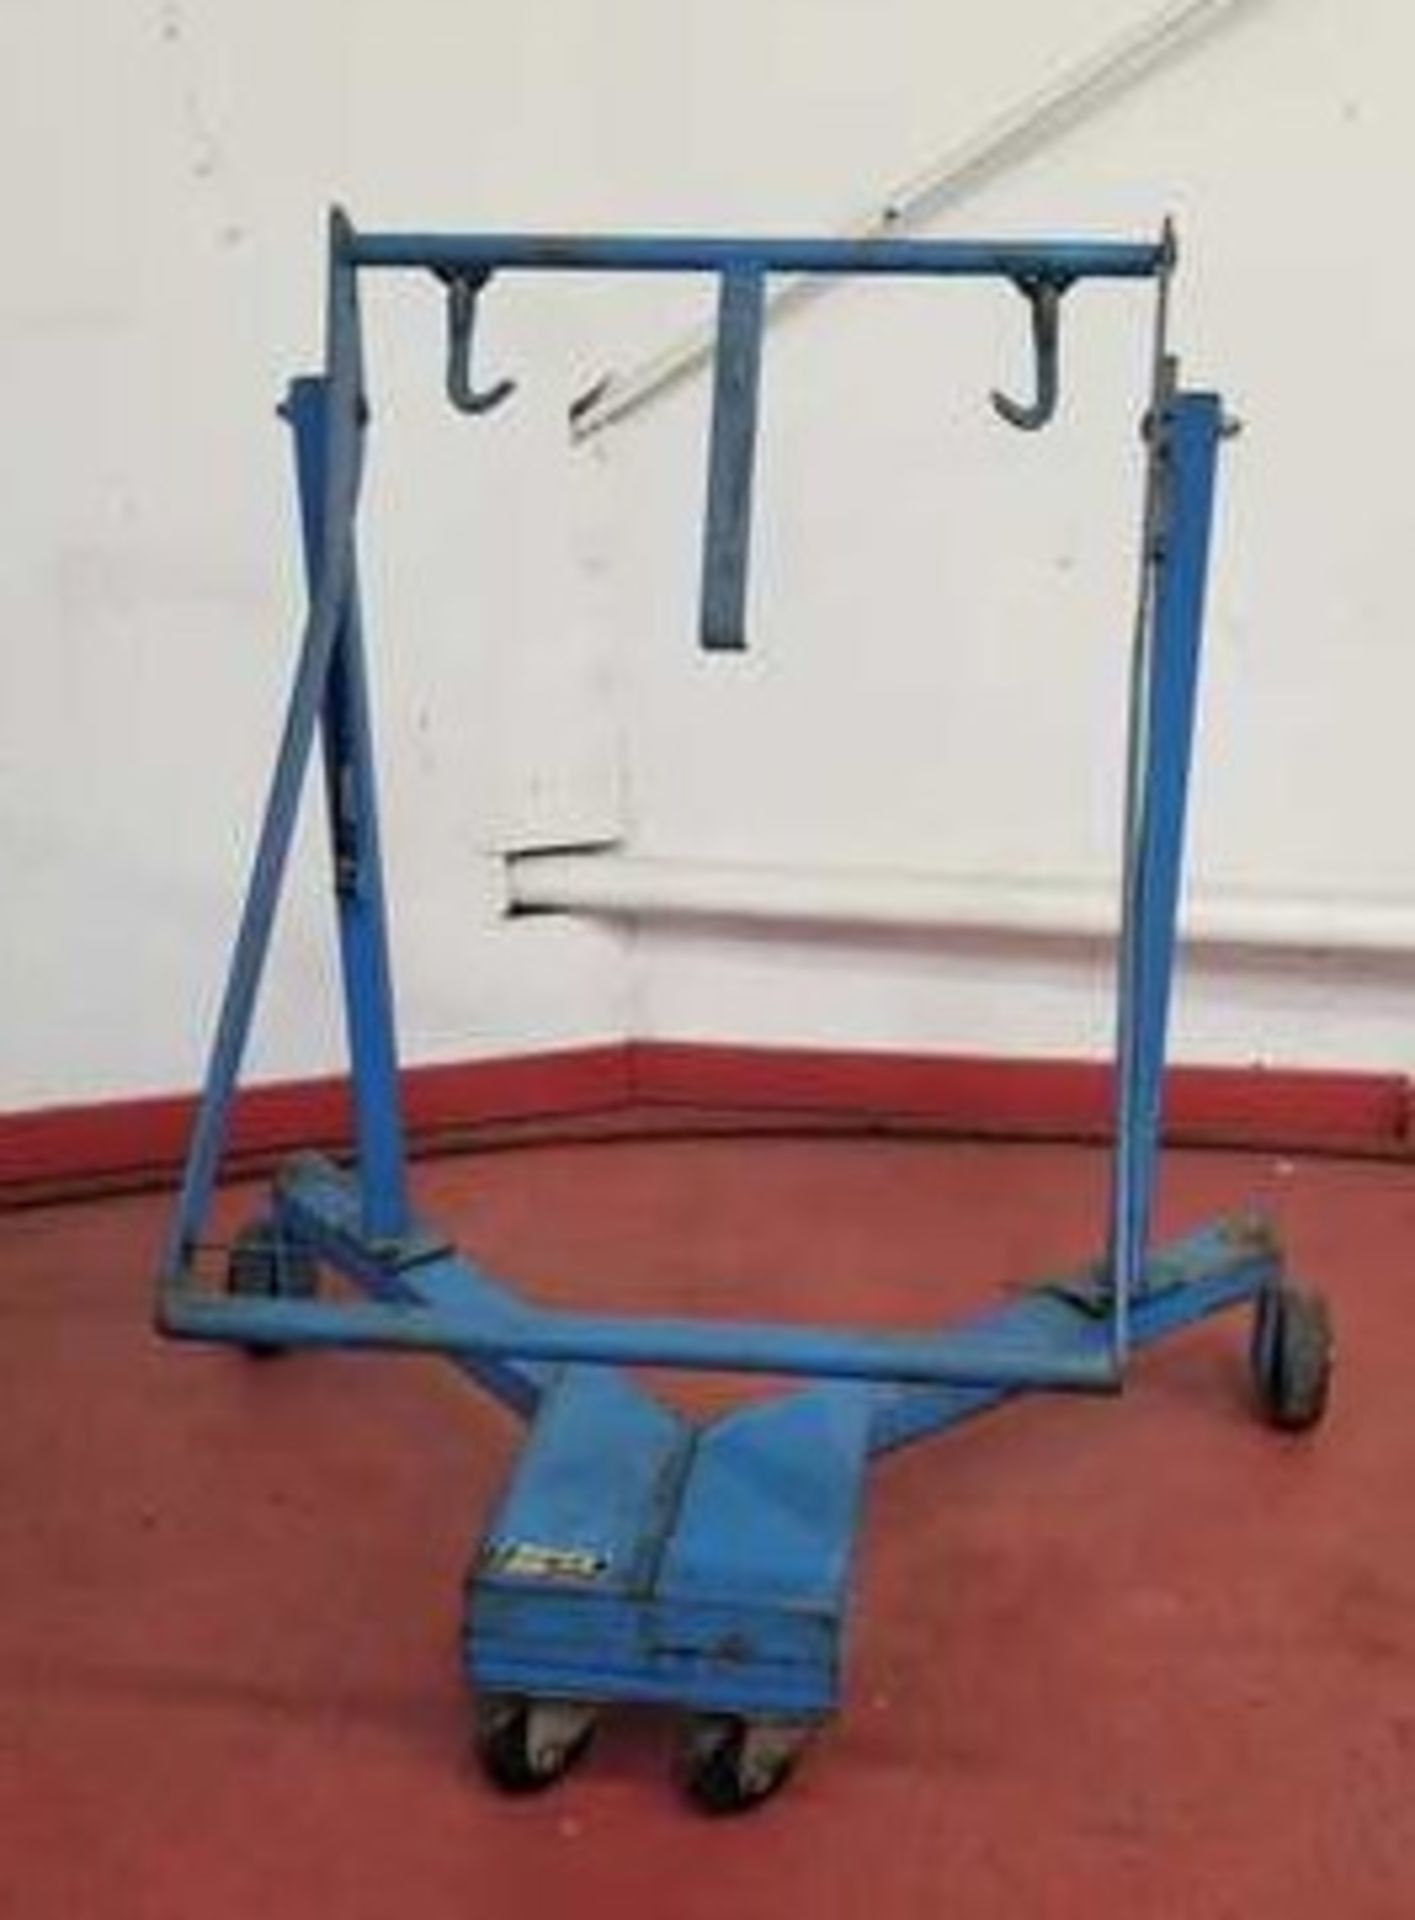 MORRIS Pallet Jack Battery Lift and dolly. 800 lb. capacity. MDL: 69. OD = 49 x 36 x 47". Offered AS